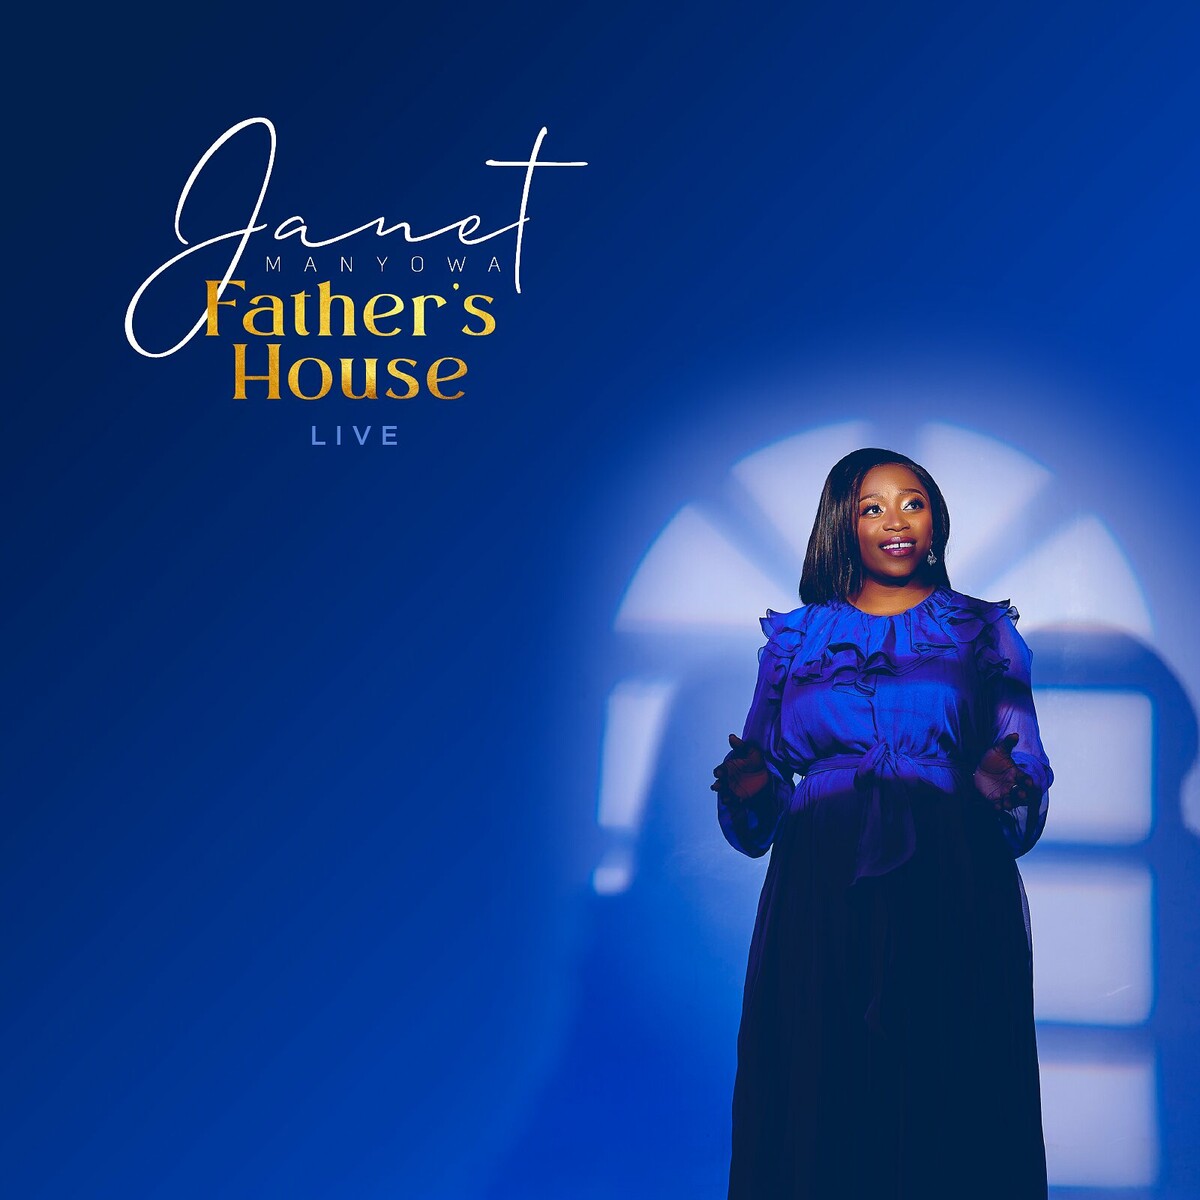 Father's House (Live) by Janet Manyowa | Album